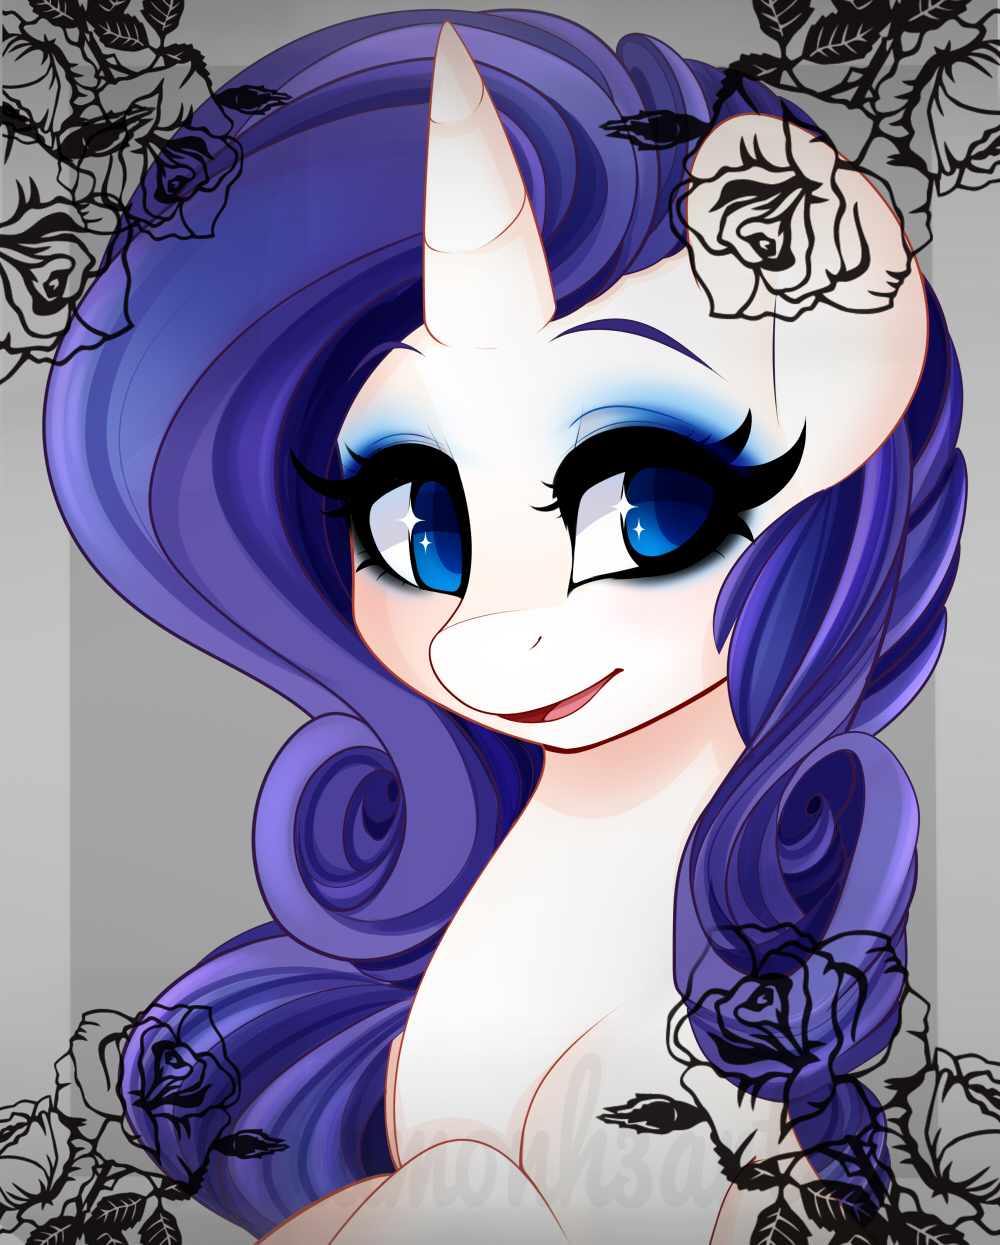 My favorite ponu is, and will always be, Rarity! 